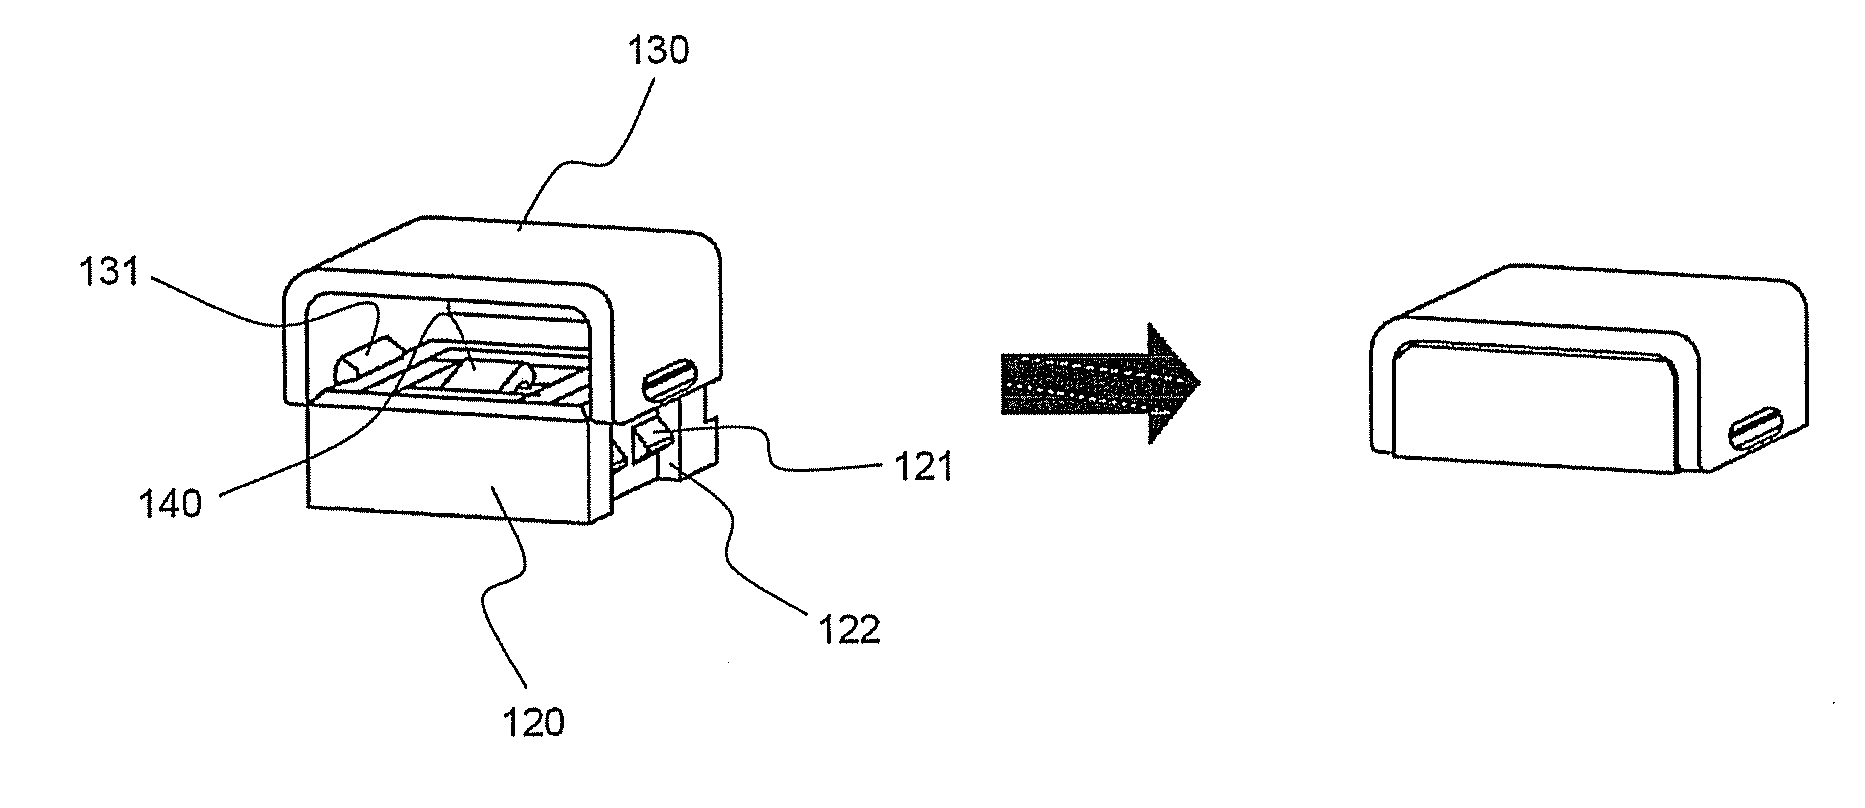 Prefabricated PCM and battery pack containing the same